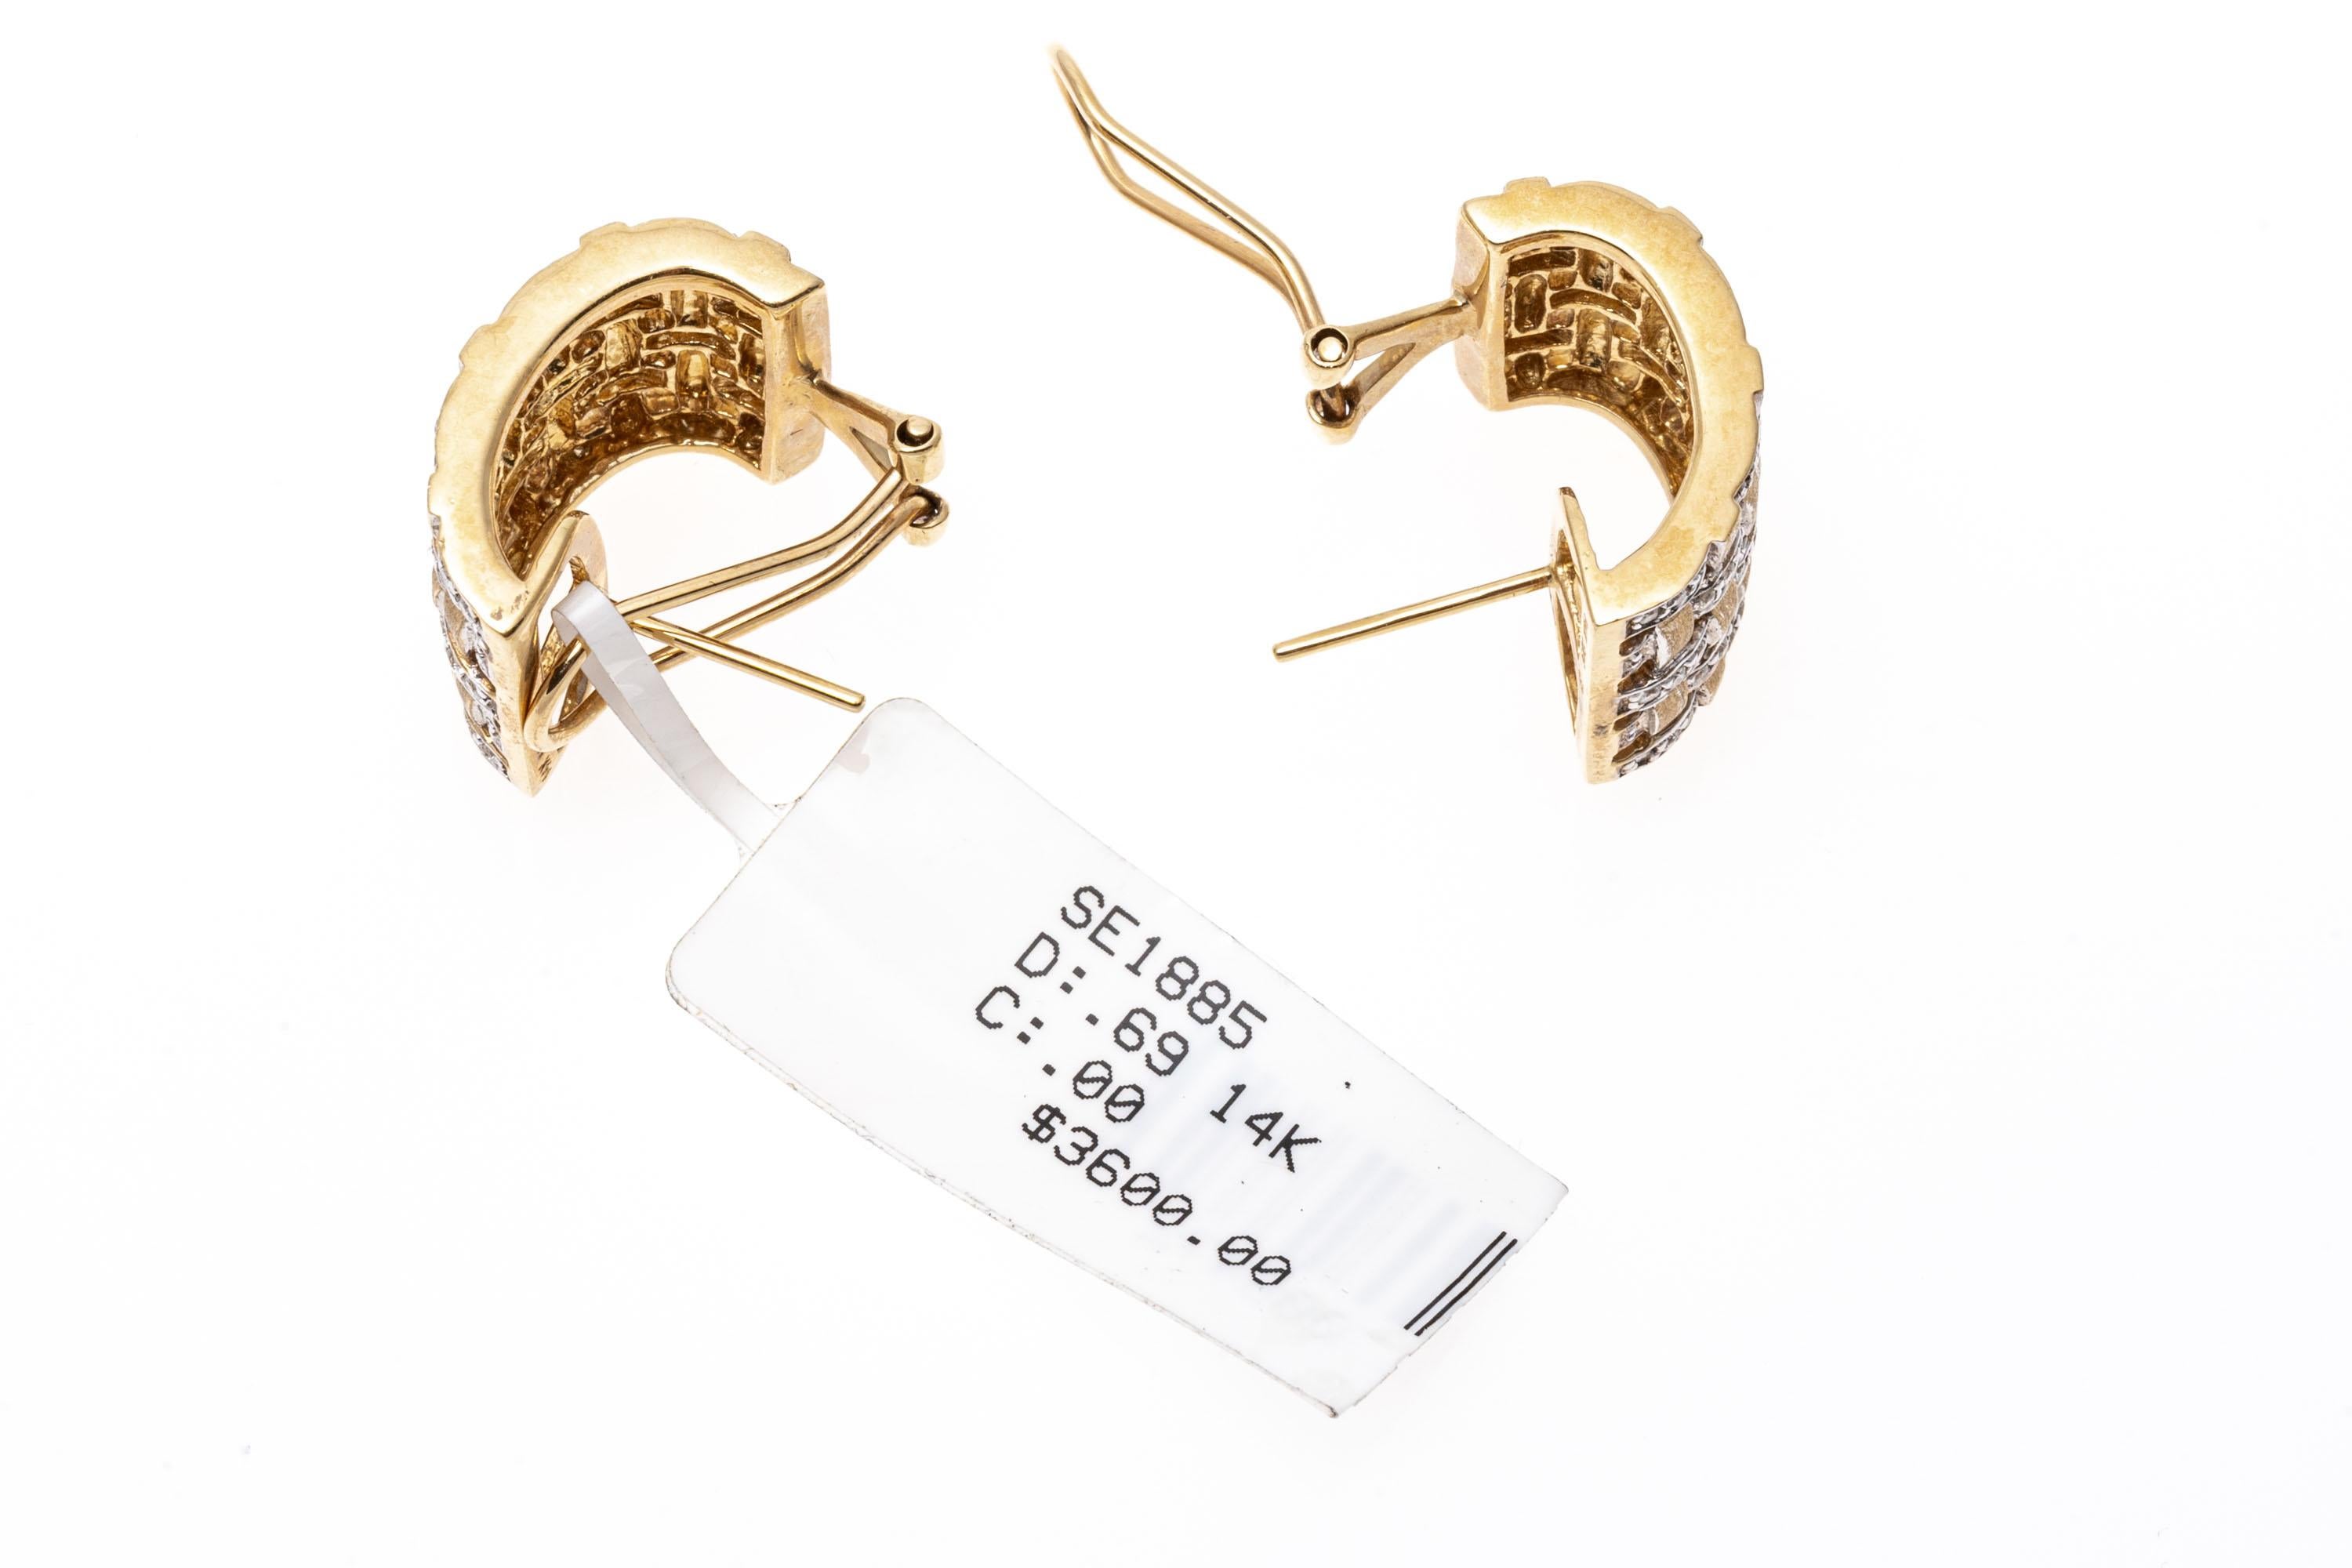 Contemporary 14K Gold And Diamond Woven Design Earrings App. 0.69 TCW For Sale